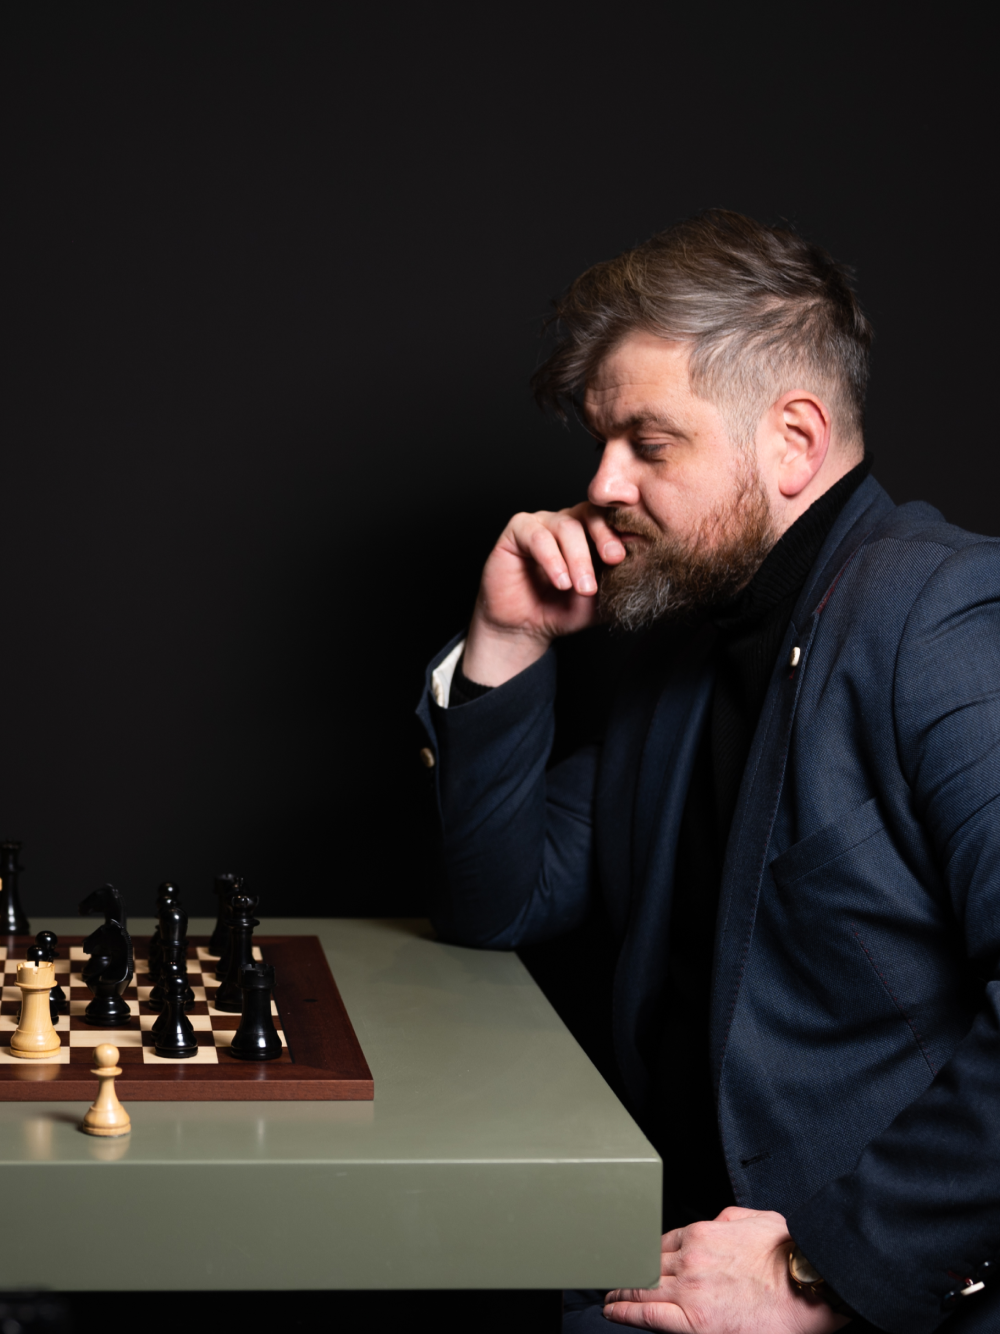 New In Chess 2018/5: The Club Player's Magazine - online chess shop